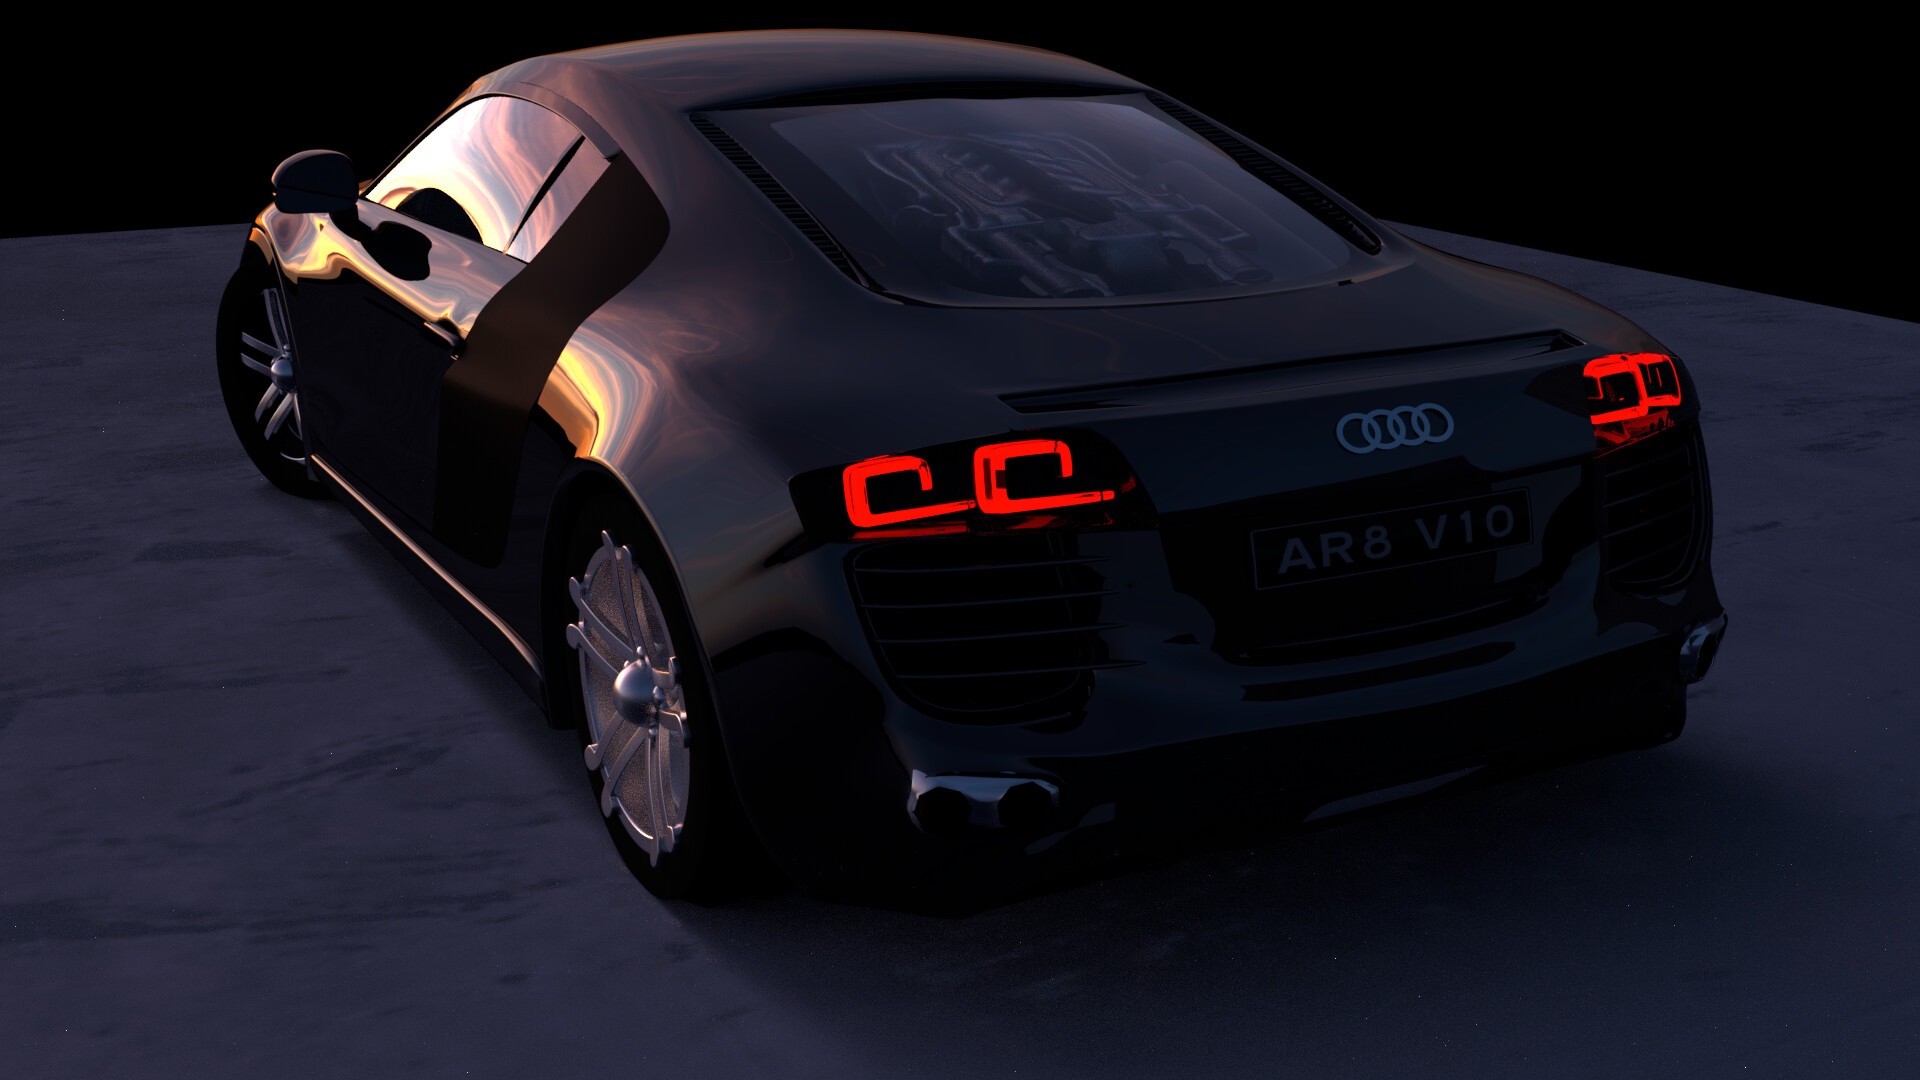 ArtStation - Audi r8 car modeling using maya and blender and texture in  blender. This is my first car model it took 3 days to complete